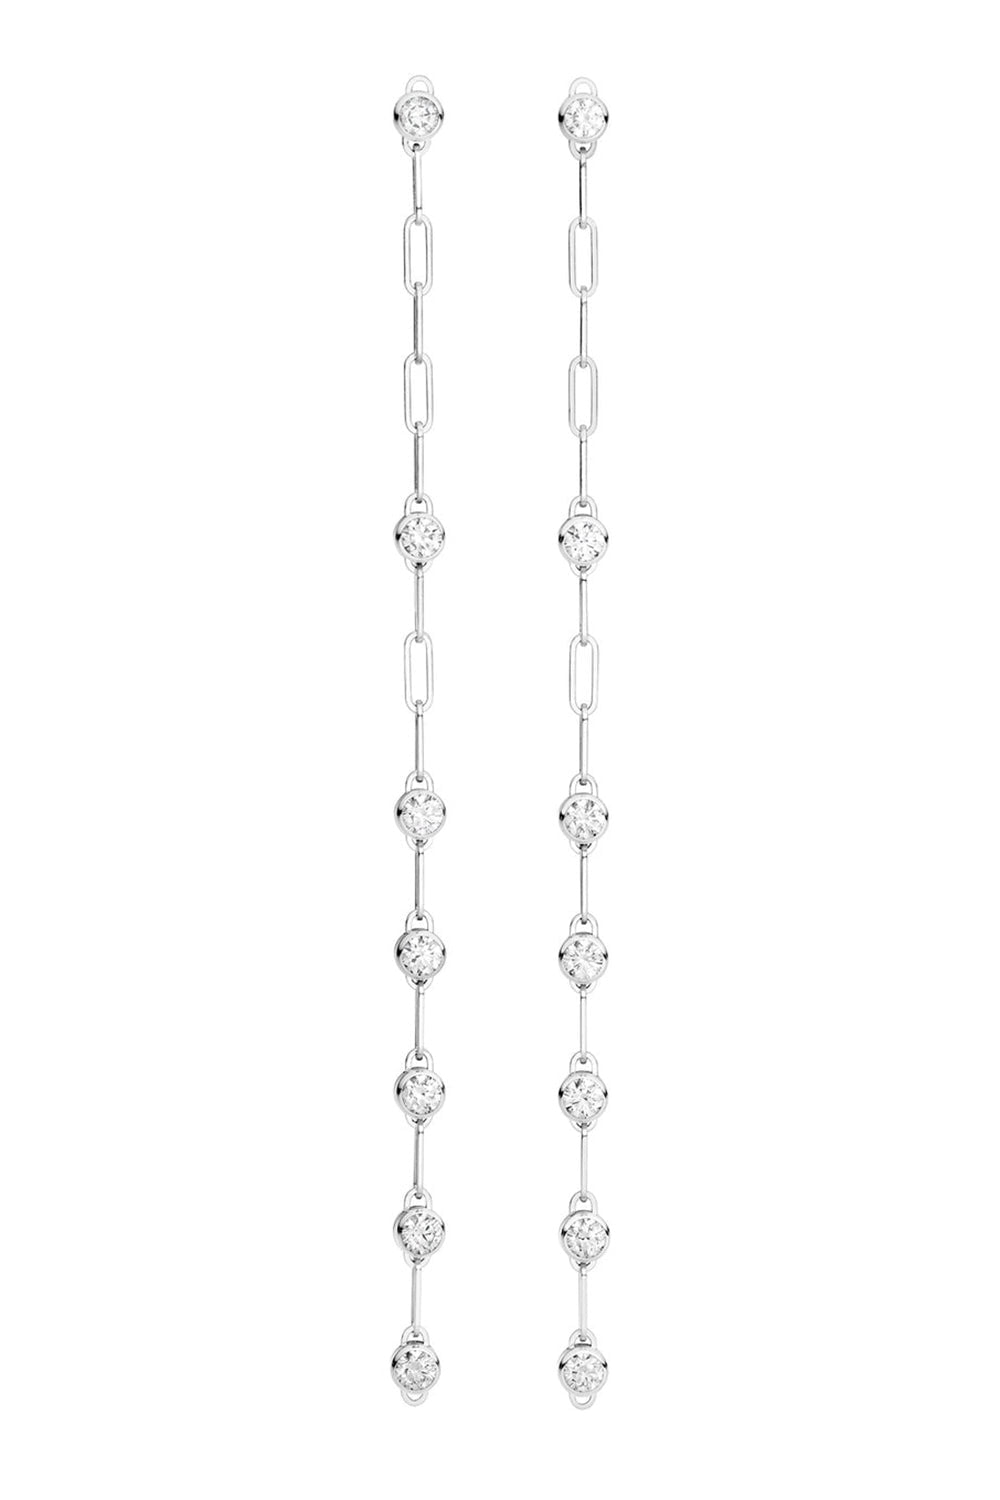 NOUVEL HERITAGE-Evening GM Classic Earrings-WHITE GOLD